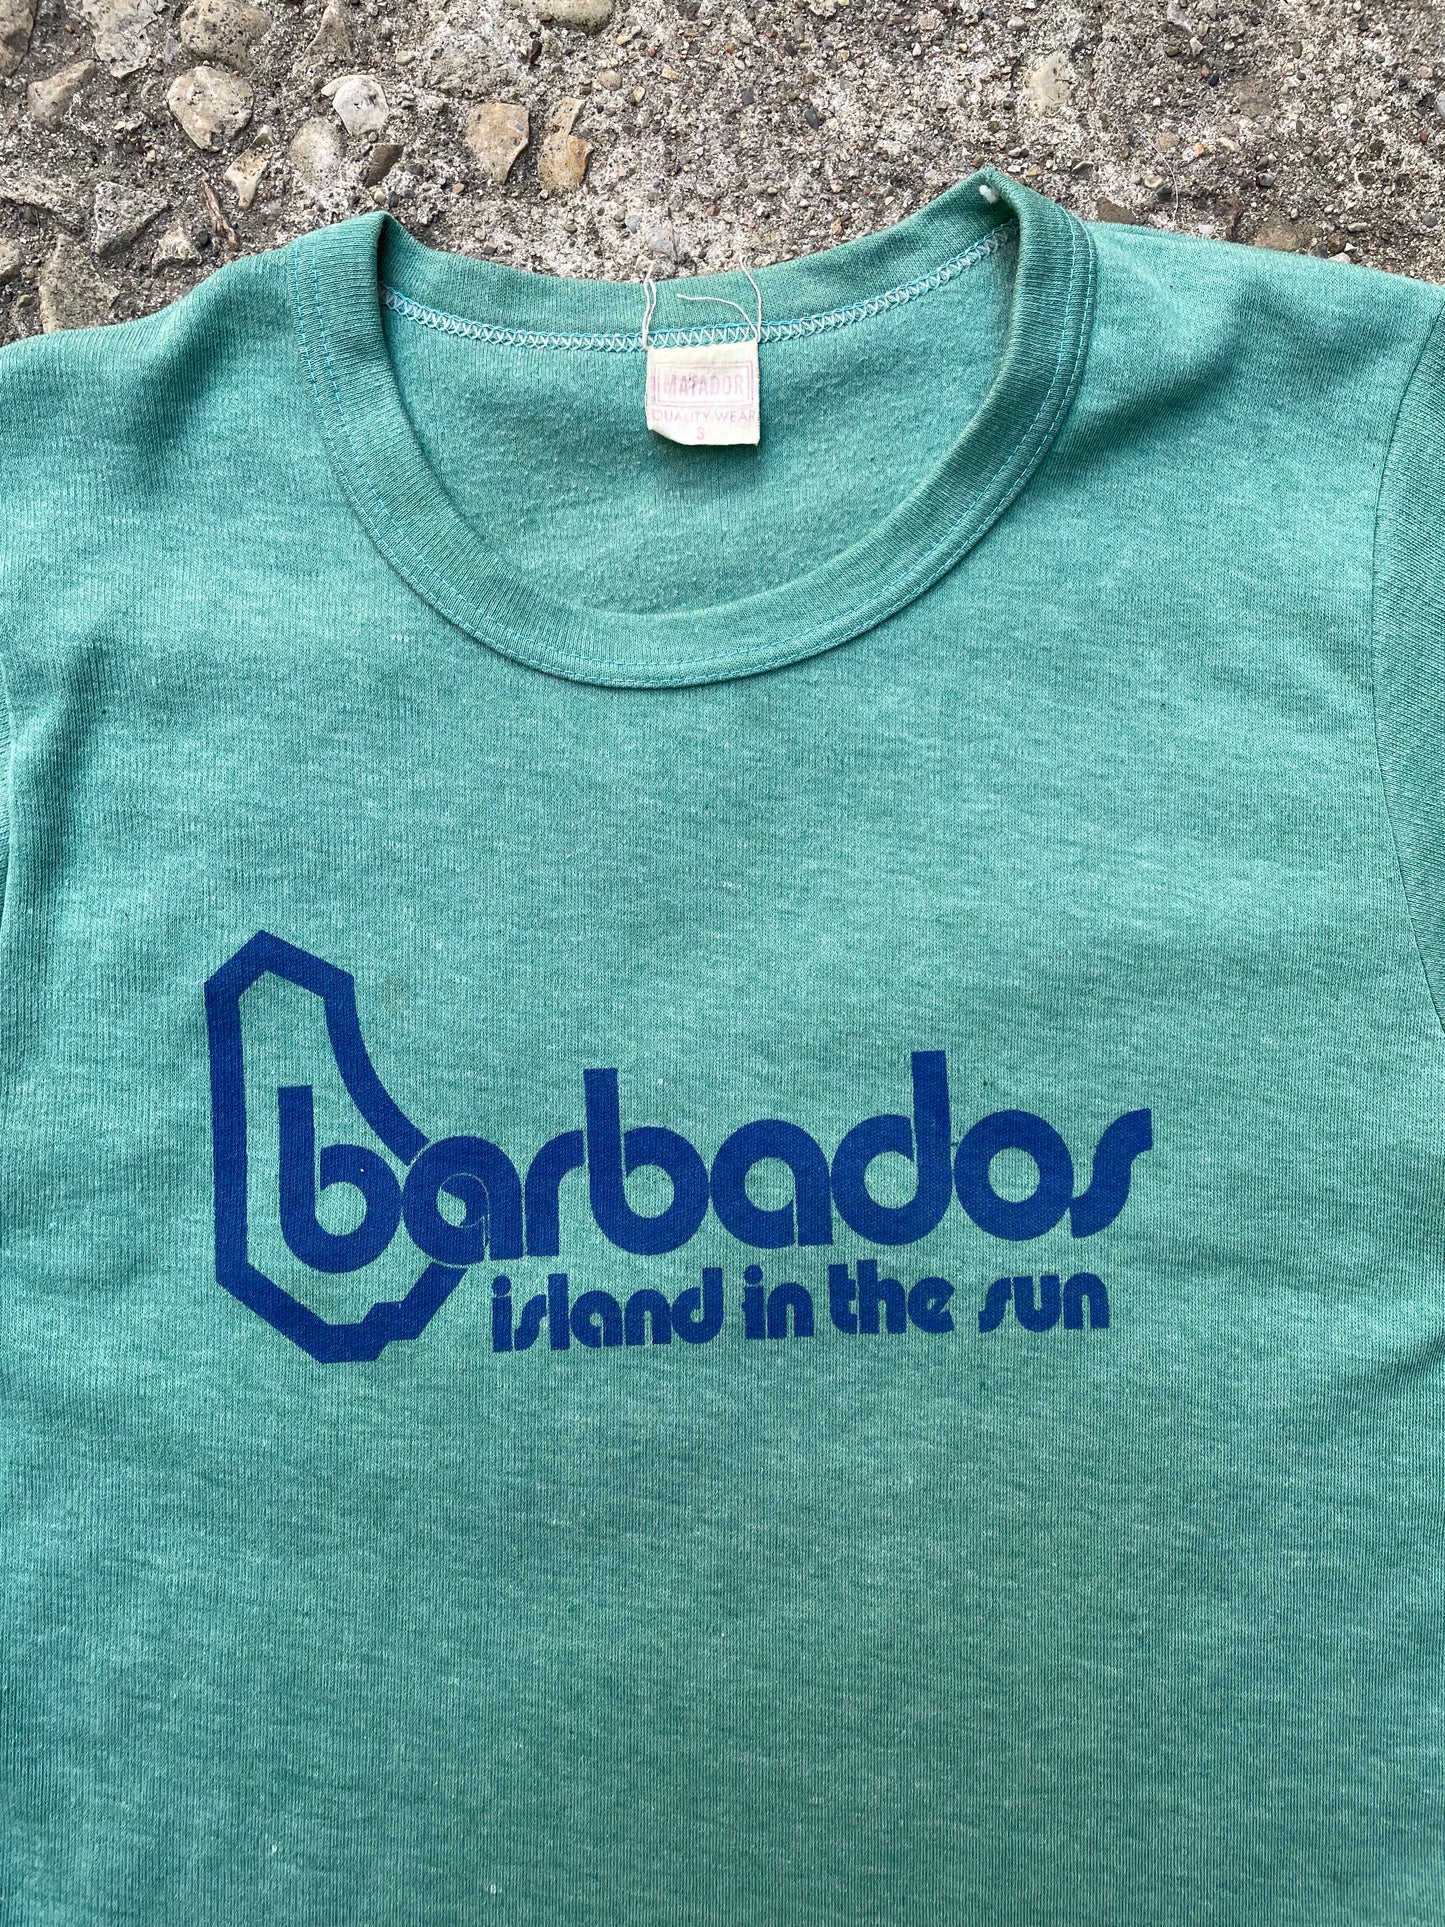 1960's/1970's Barbados Graphic T-Shirt - S